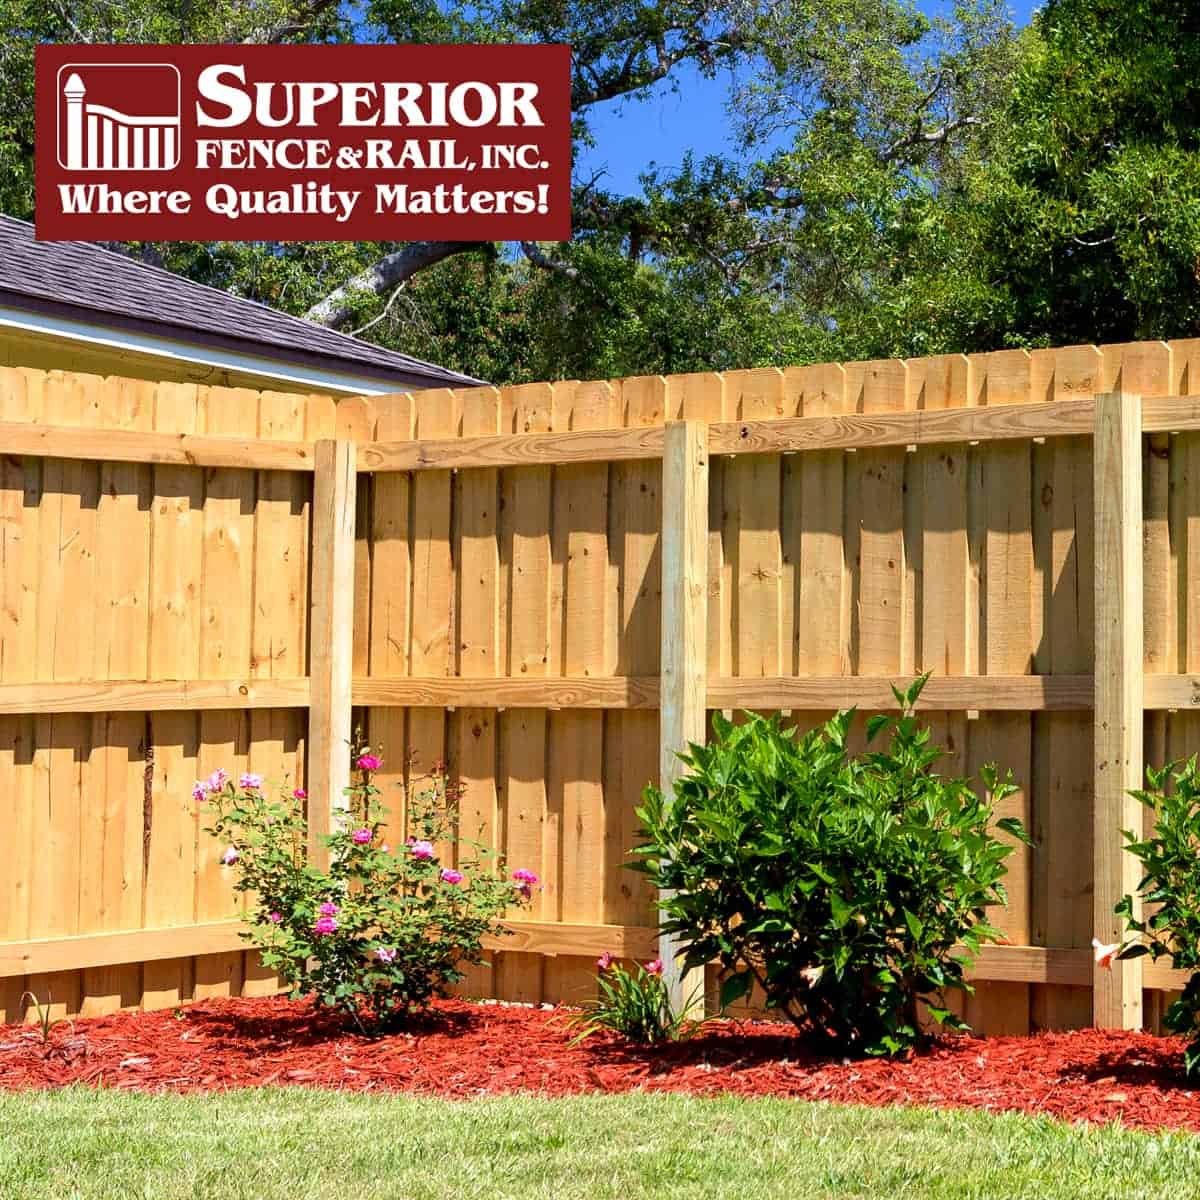 Long Beach fence company contractor